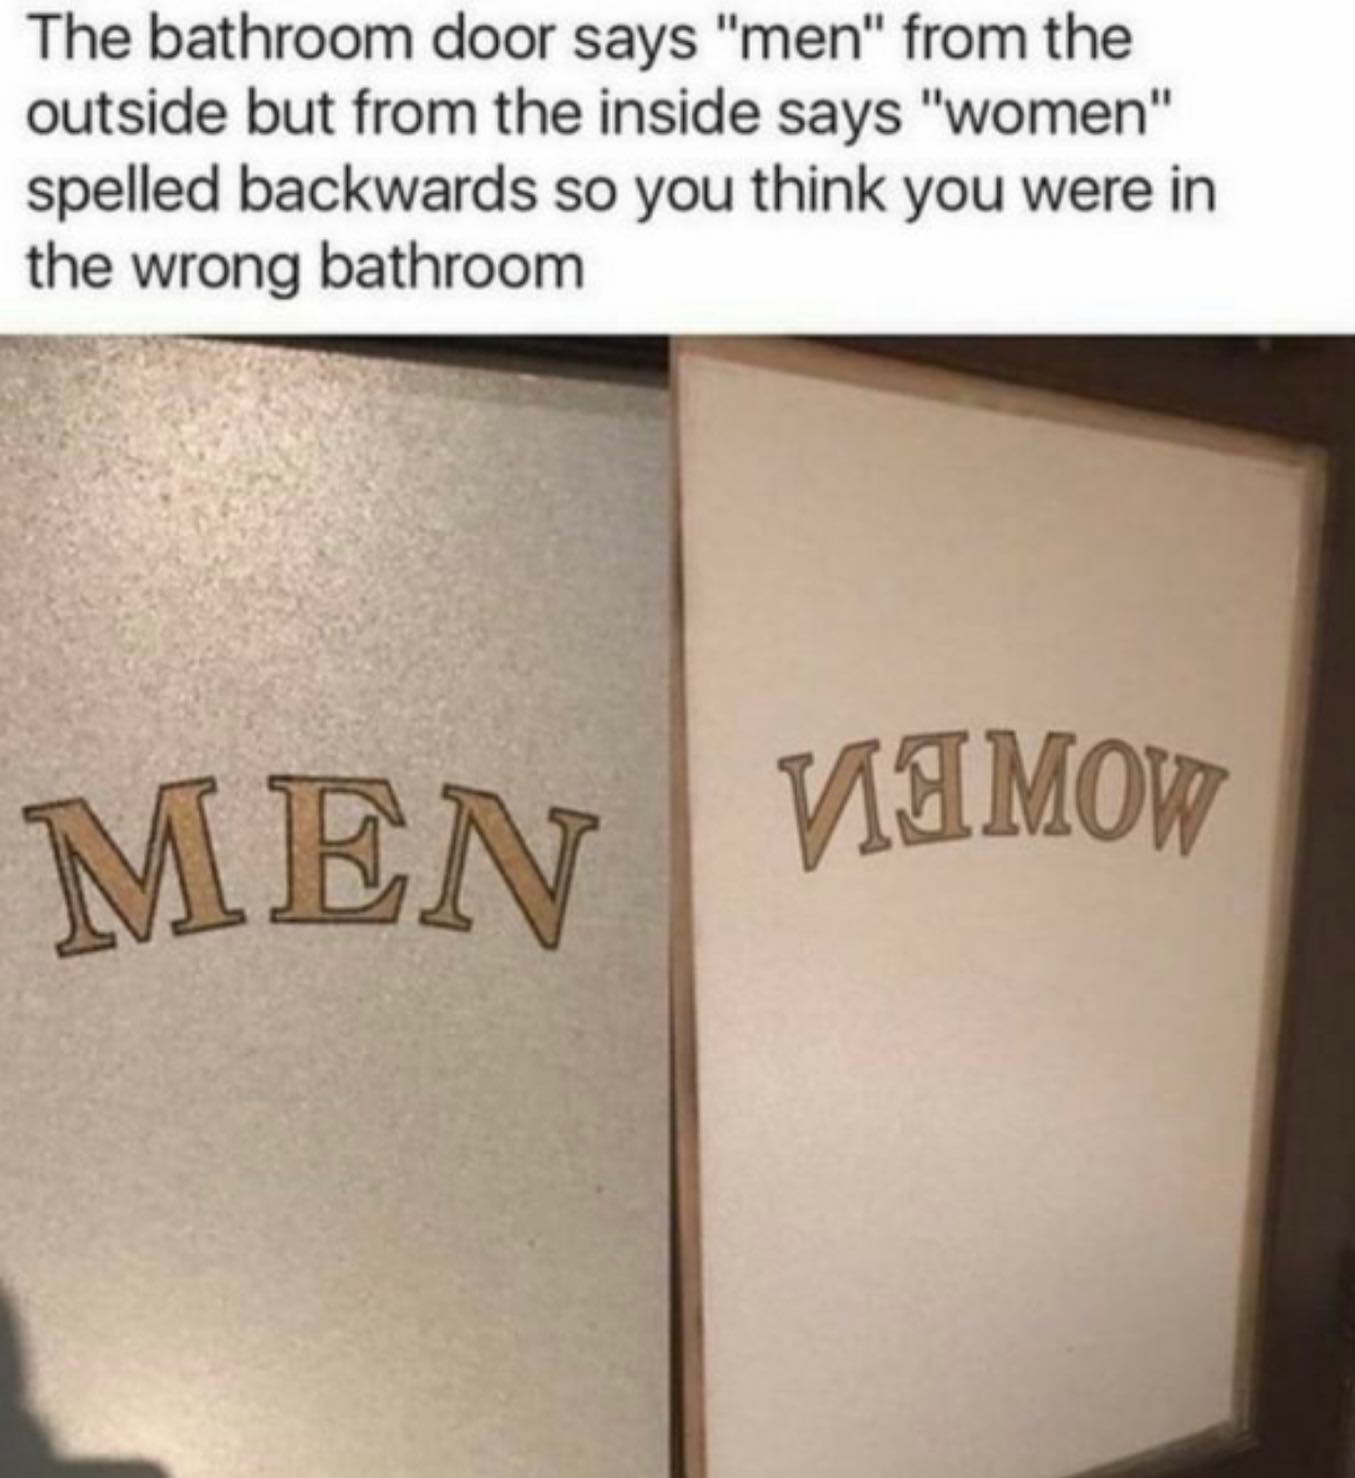 dank memes - The bathroom door says "men" from the outside but from the inside says "women" spelled backwards so you think you were in the wrong bathroom Men Vimow